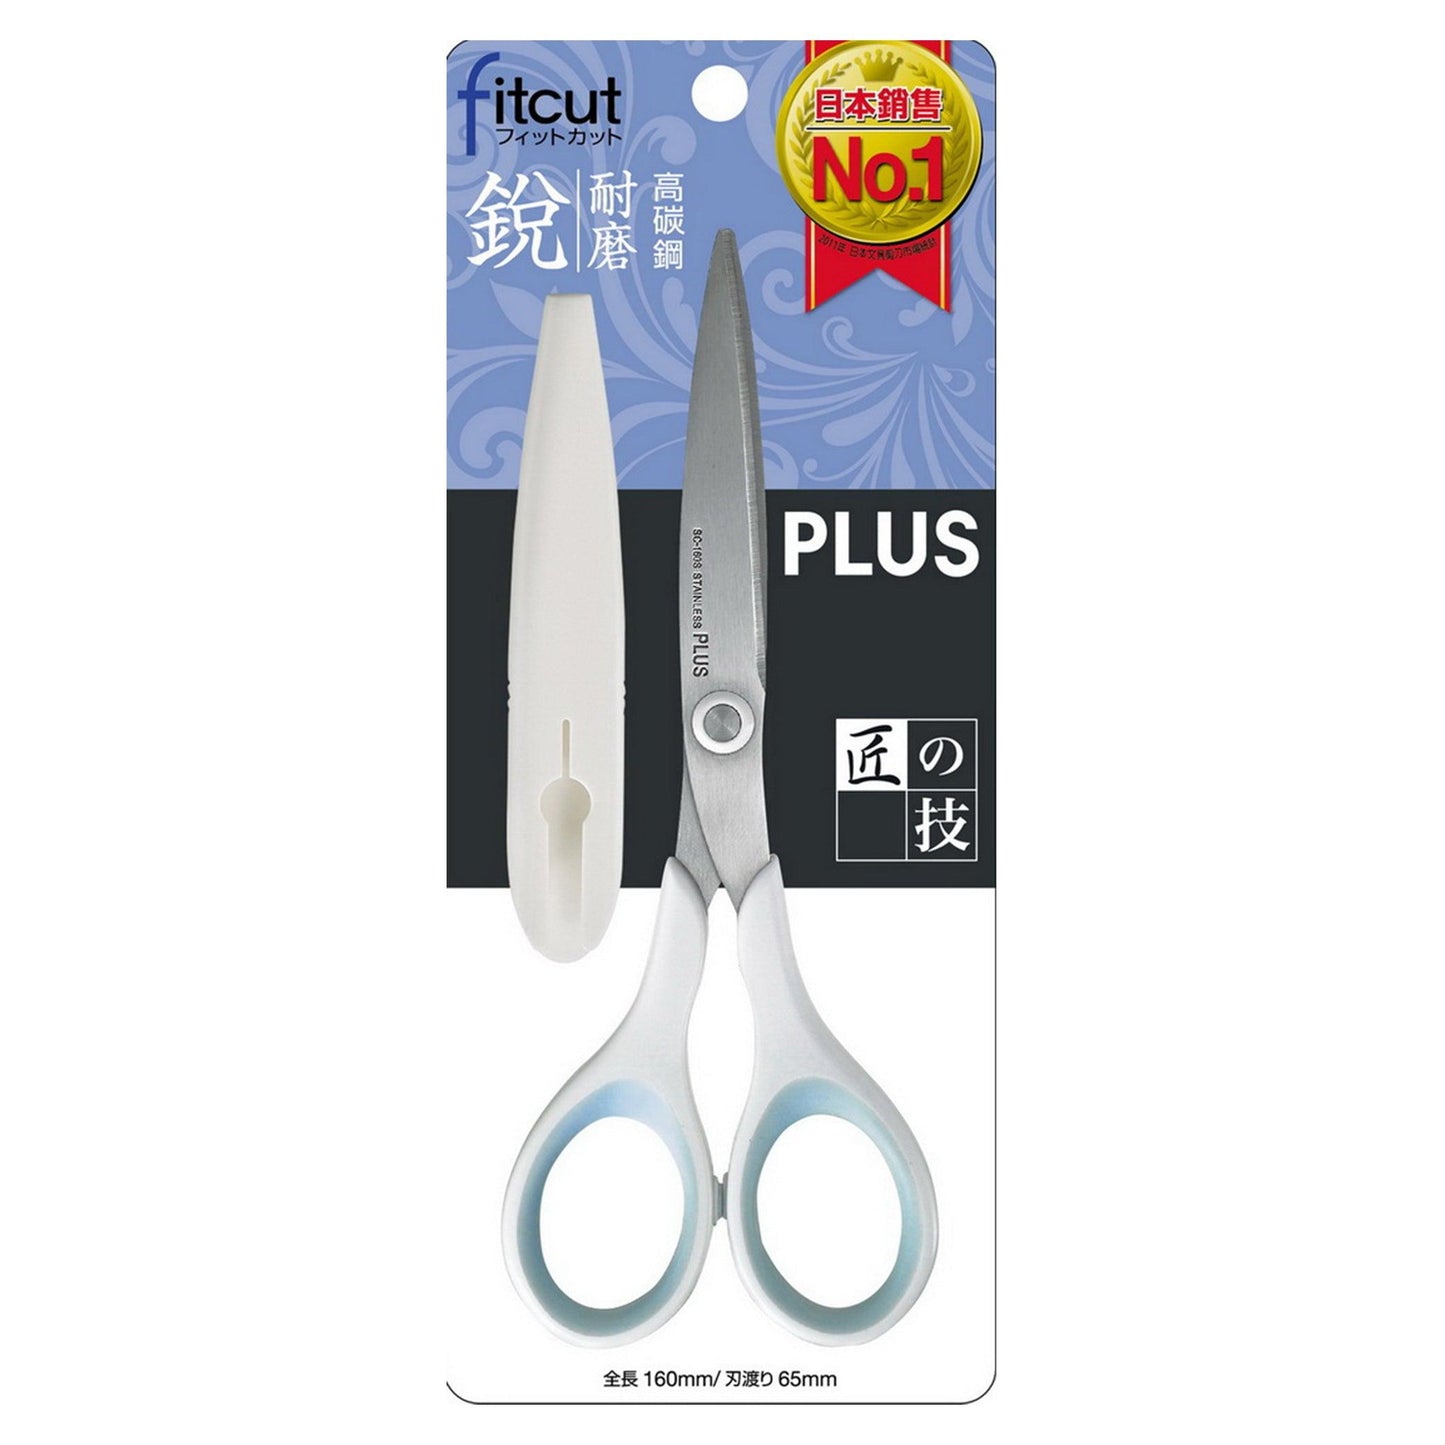 Plus SC-165AF SC-160S Stainless Steel Safety Scissors Non-stick (White with Storage Cover) 34-354 - CHL-STORE 